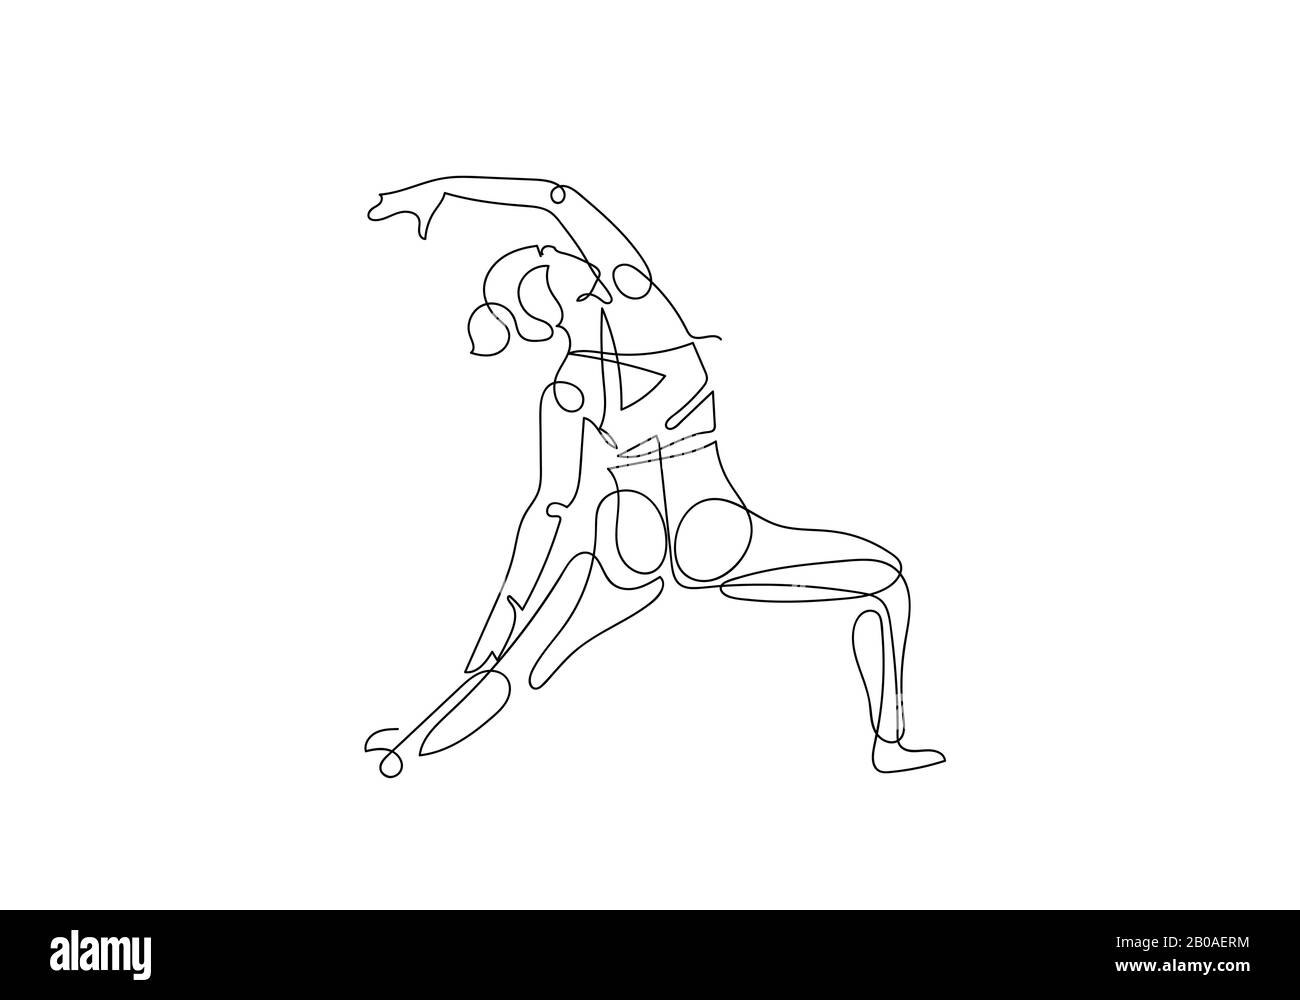 Continuous one or single line drawing. Woman doing exercise in yoga ...